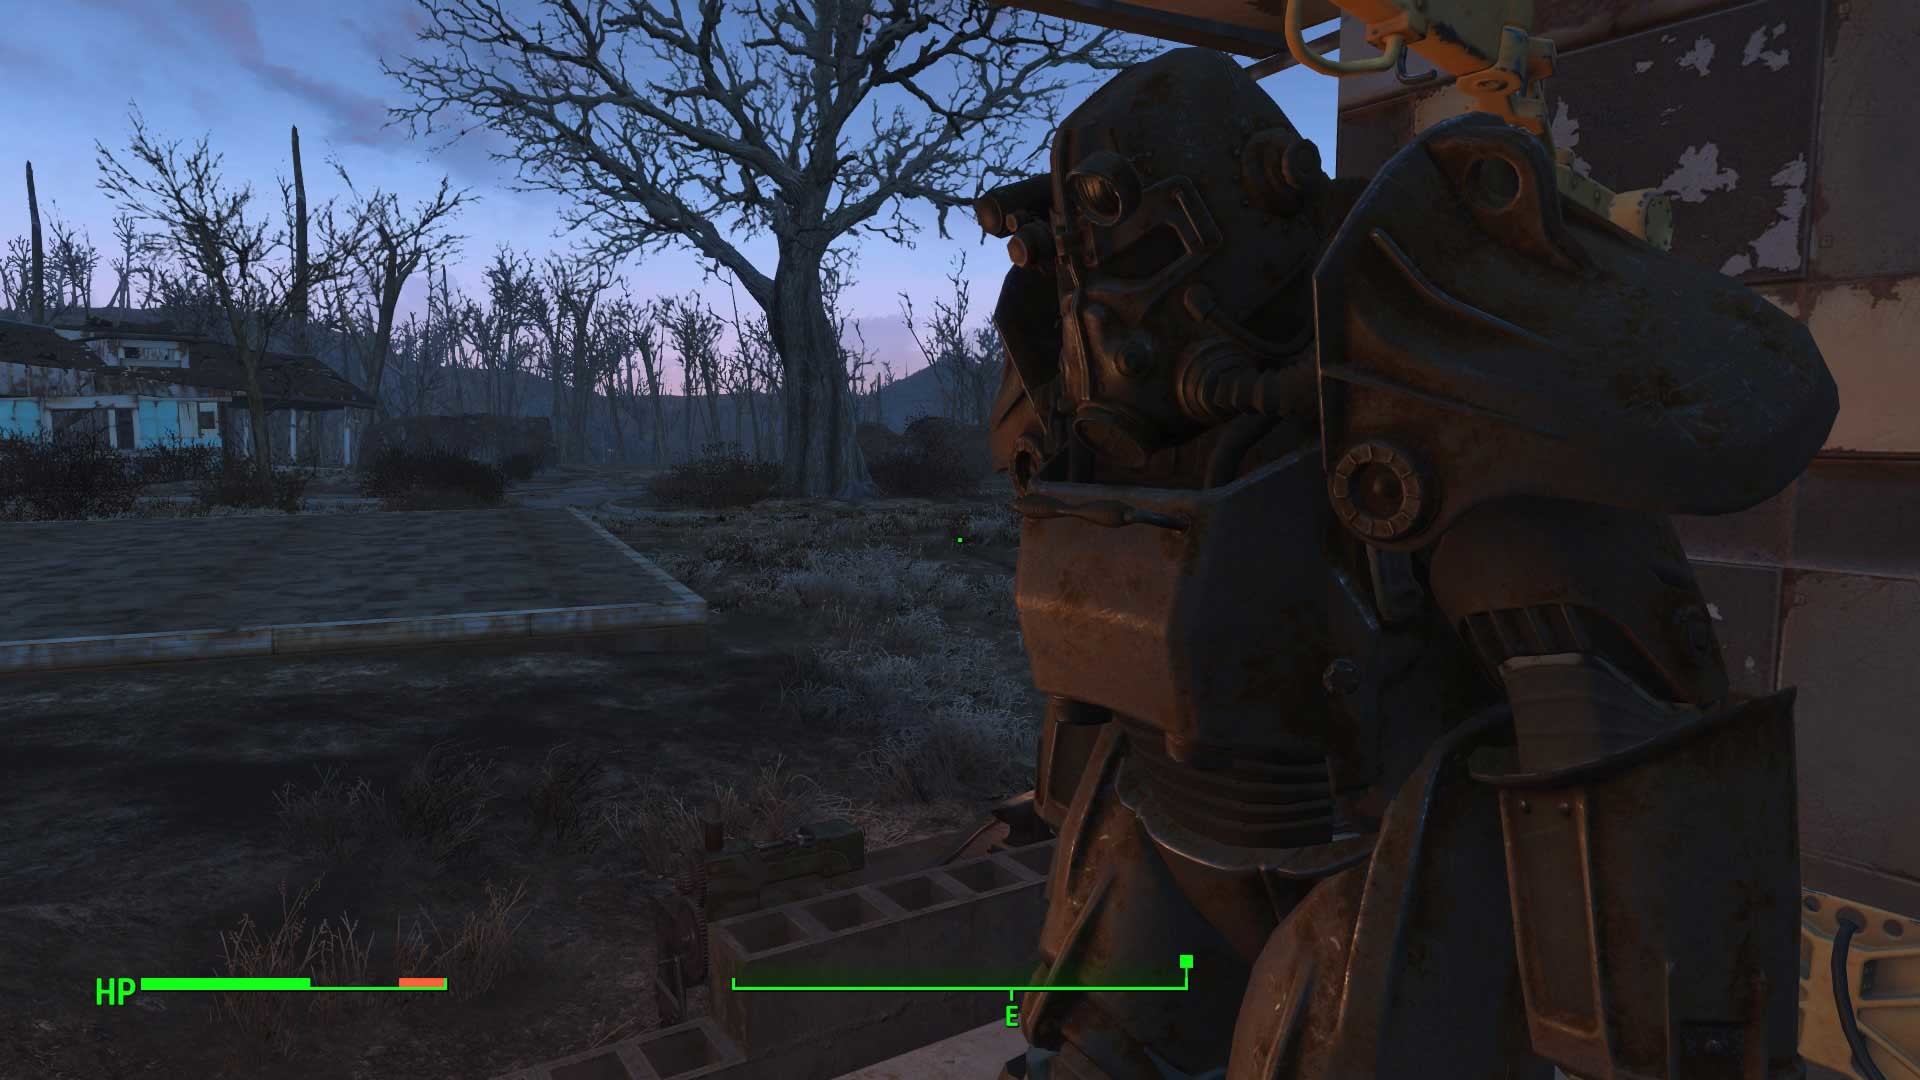 1920x1080 Fallout 4: Power Armor use, repair and modding guide